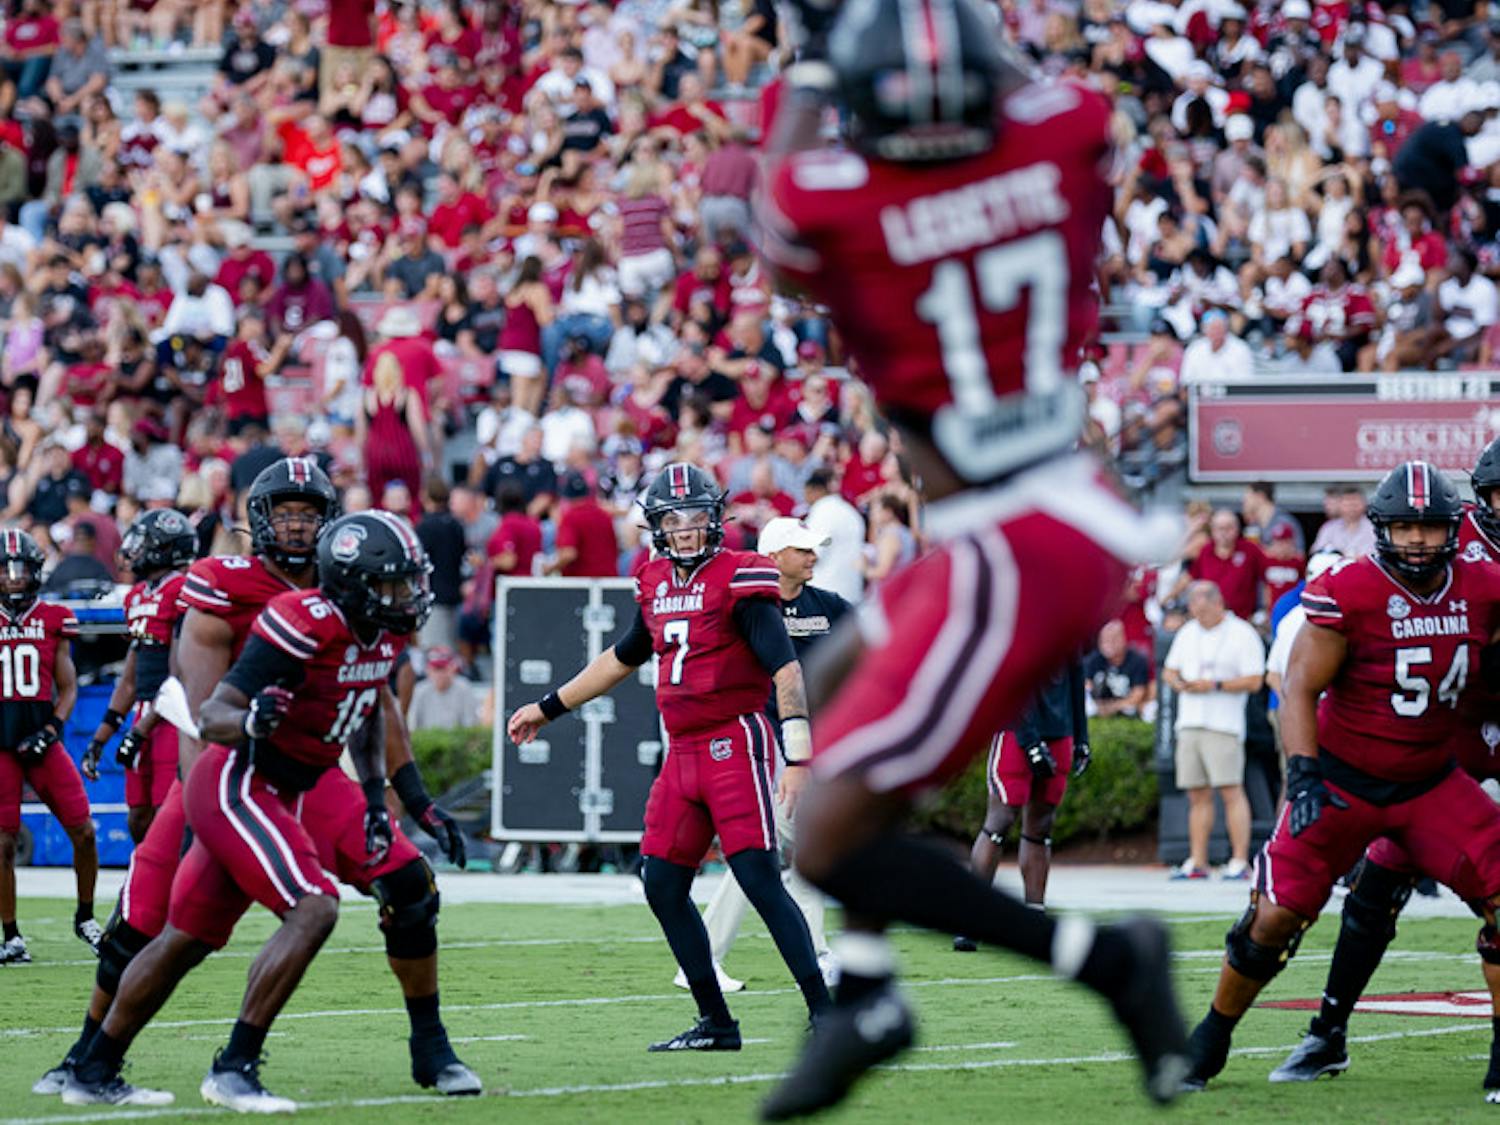 Redshirt Junior Quarterback Spencer Rattler completes a pass to Senior Wide Receiver Xavier Legette during the match against Georgia State University on September 3, 2022. The Gamecocks beat the Panthers 35-14.